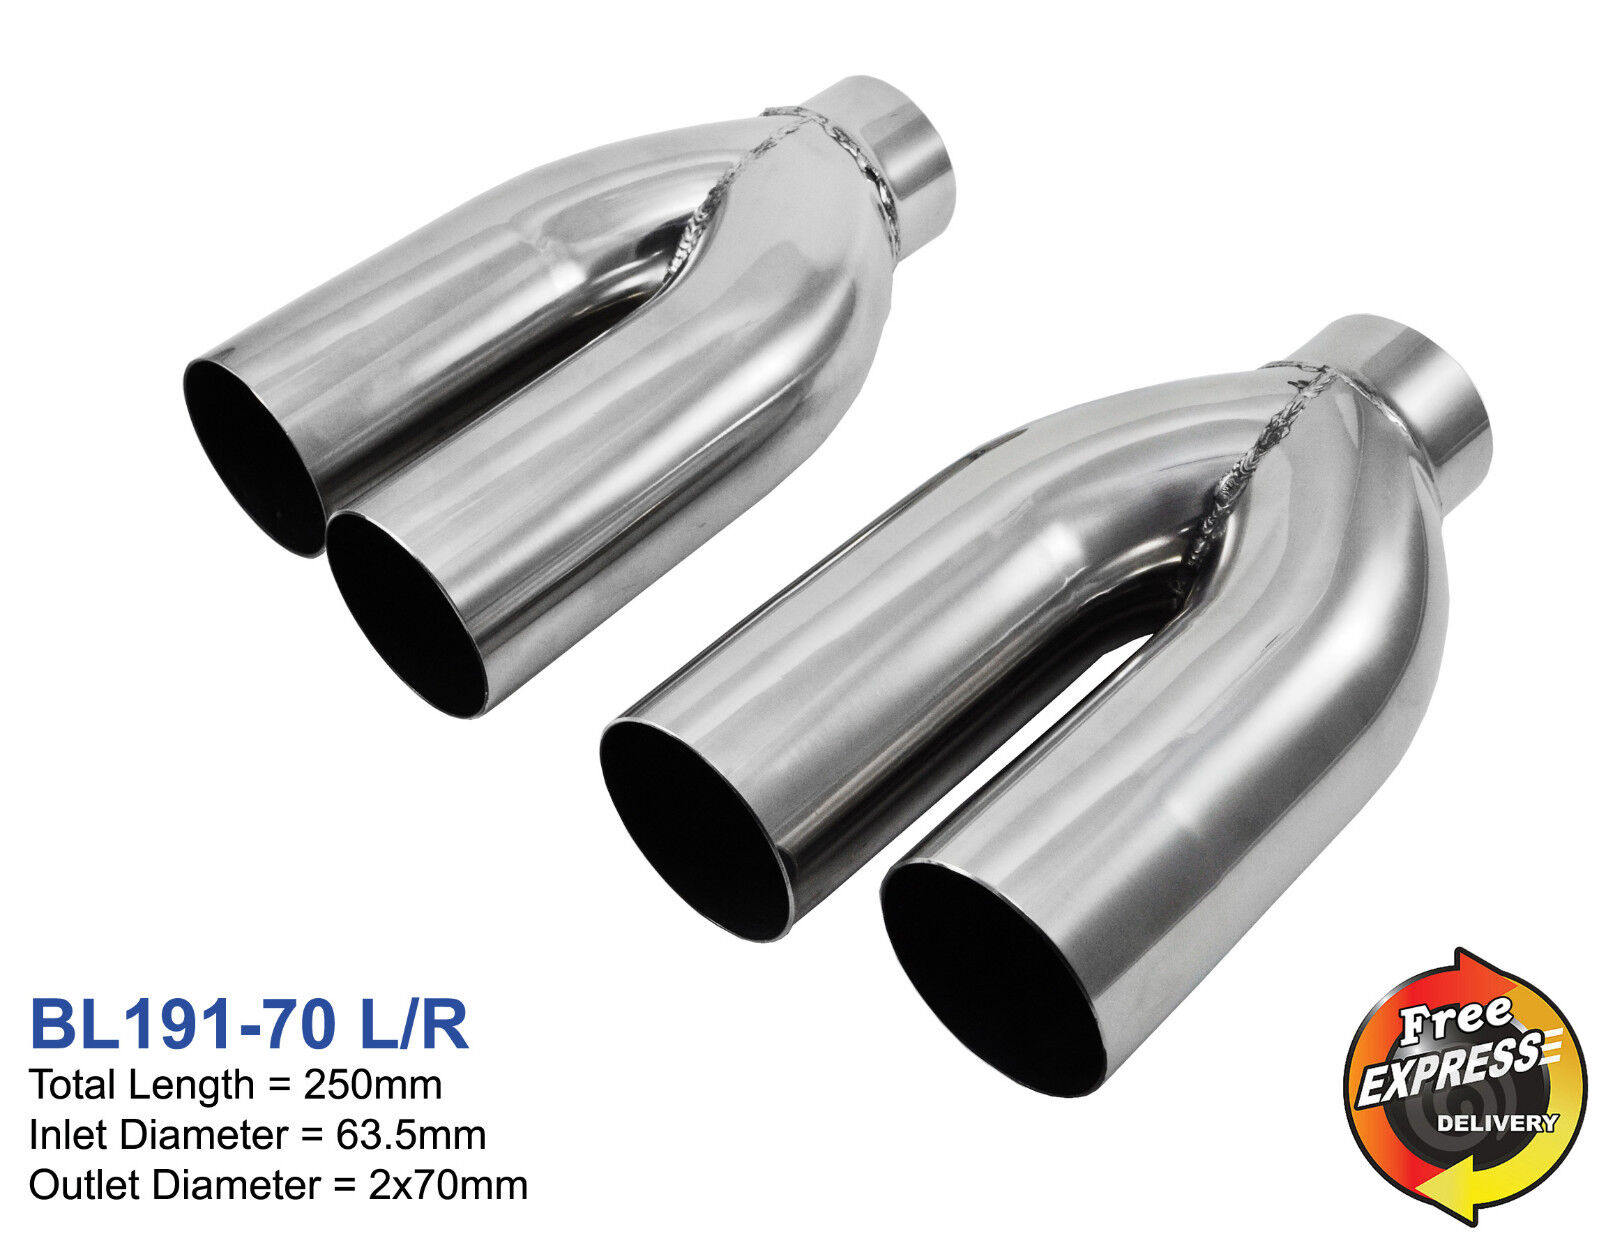 Exhaust tips tailpipes trims SET for BMW M5 E39 to replace rear mufflers 